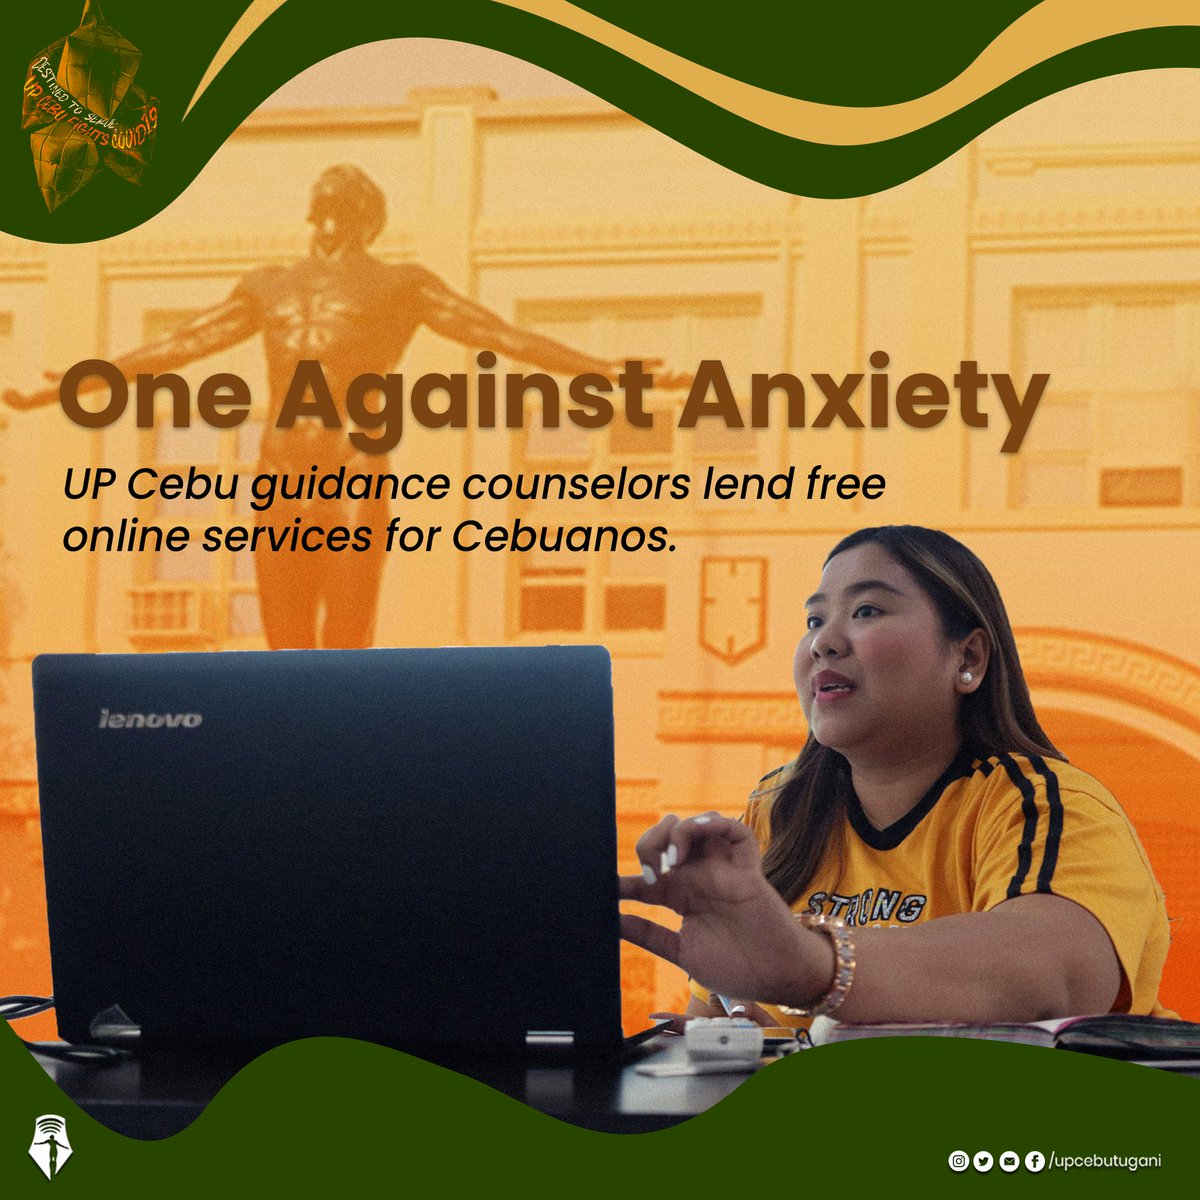 UP Cebu Guidance Services Specialist Jaseluh Saturinas, fondly known as Miss Jas, heads Cebu COPES (Counselors Online Psychological and Emotional Support), a group of experts who offer free telecounselling services amid the pandemic. #BayanihanNa

Read: bit.ly/2X7F5Qg